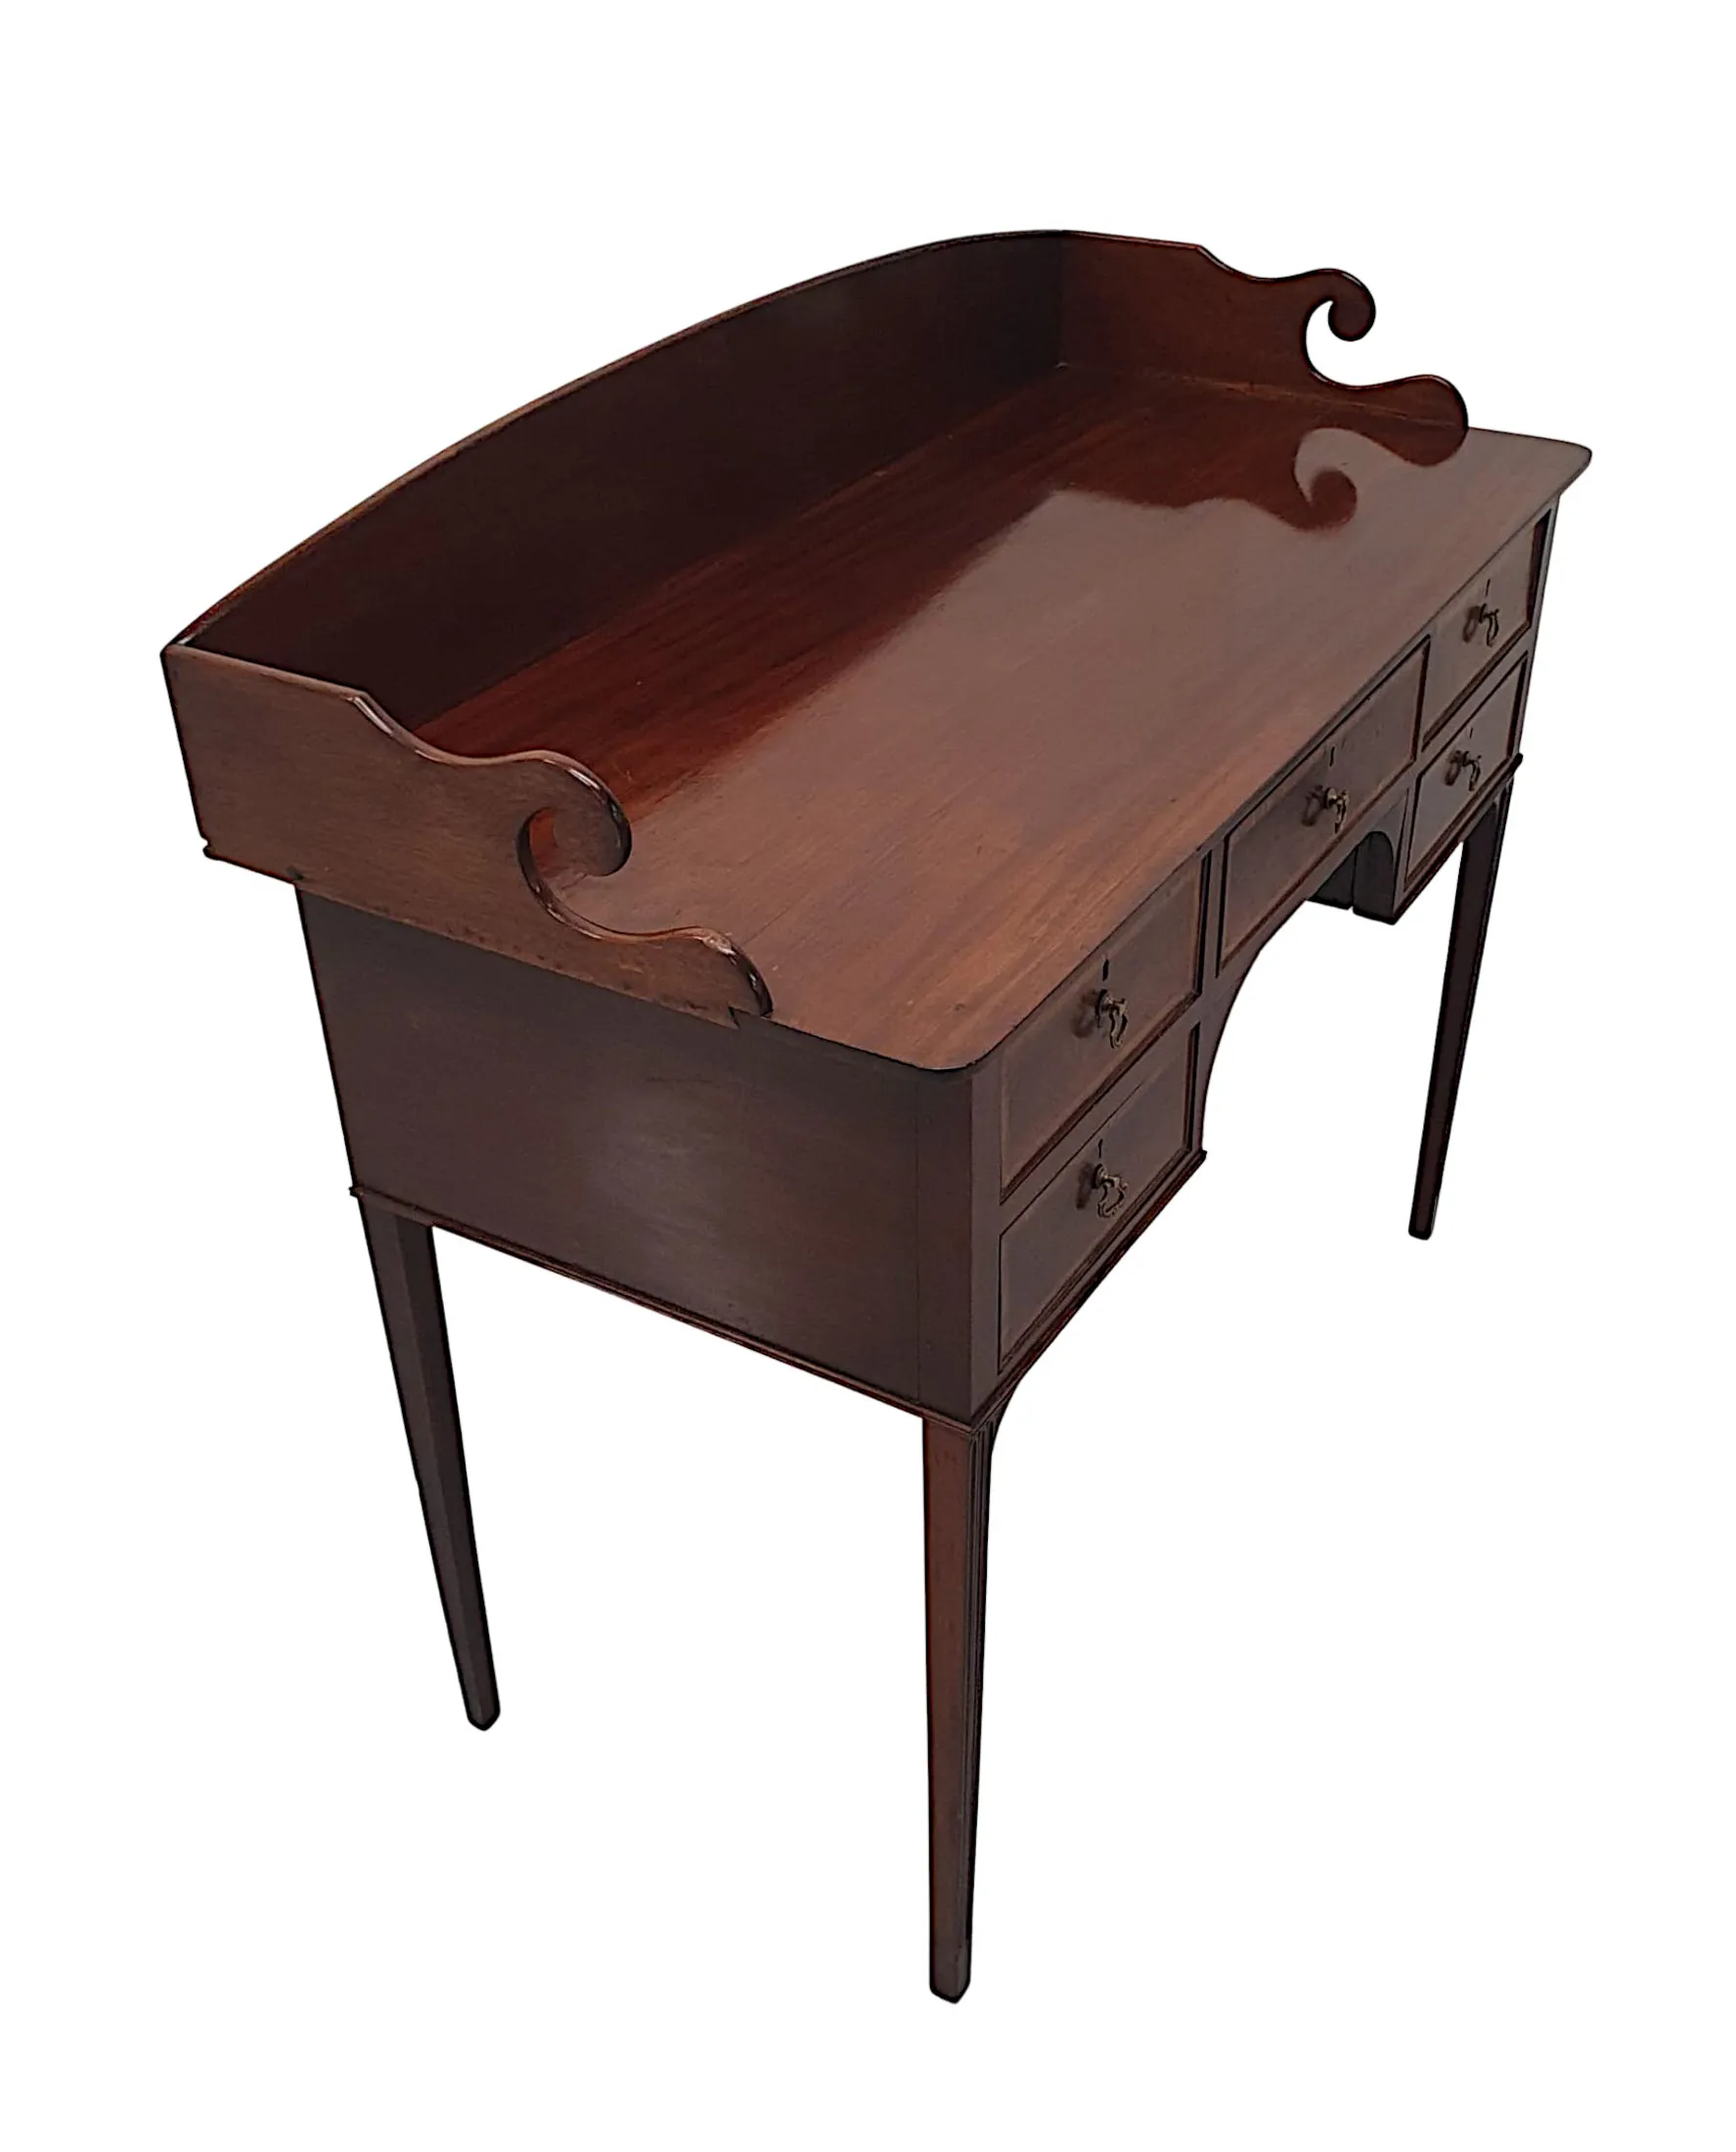 A Fine 19th Century Inlaid Mahogany Sideboard or Hall Table